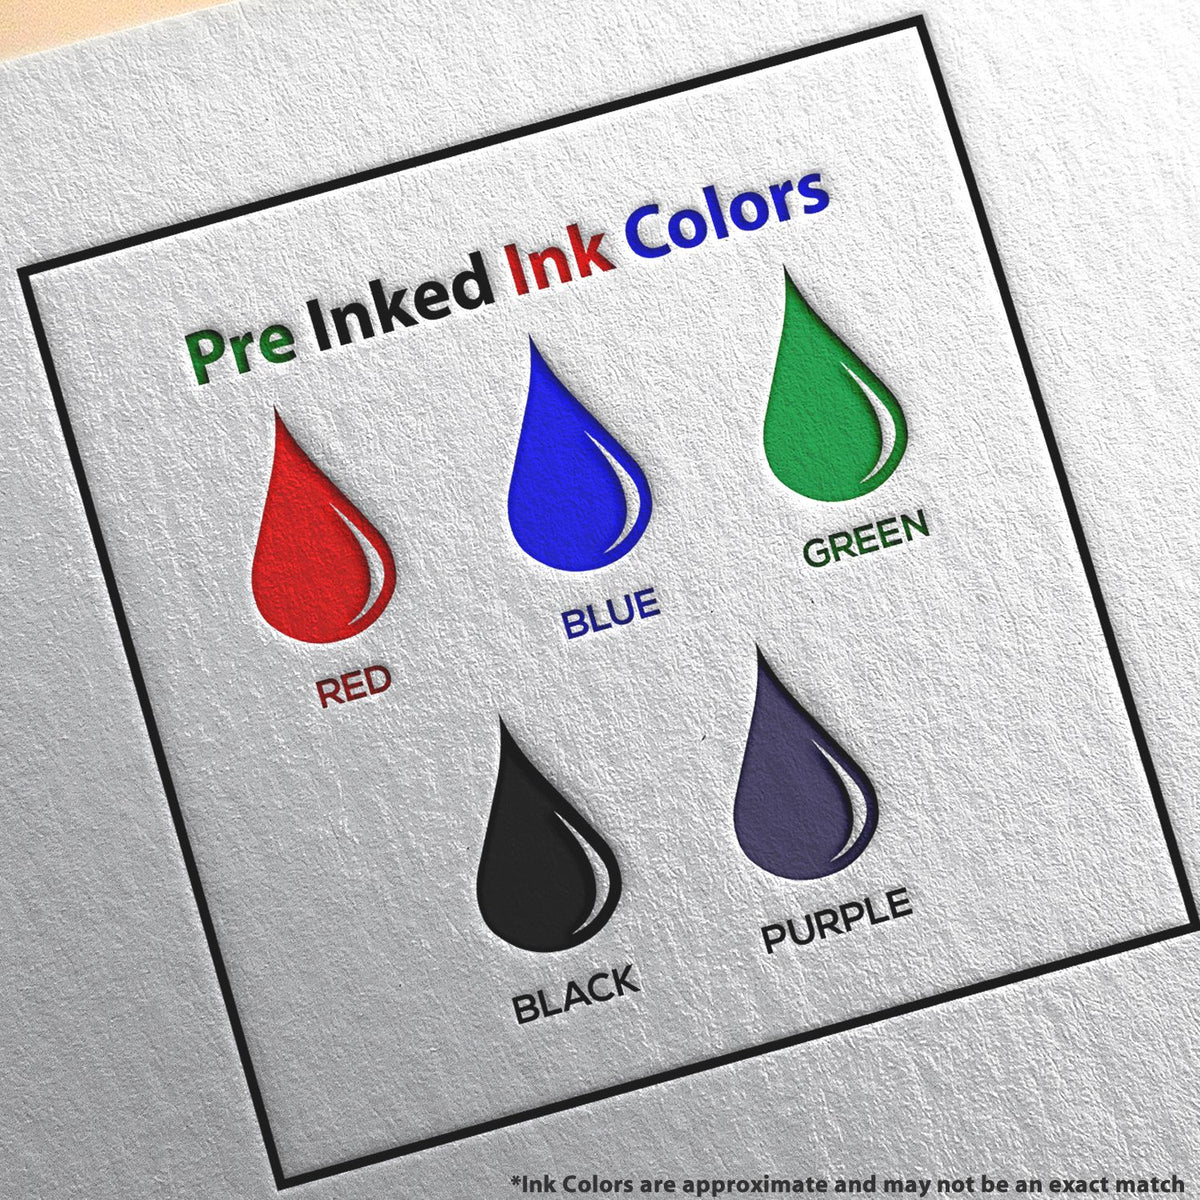 A picture showing the different ink colors or hues available for the Slim Pre-Inked Wyoming Architect Seal Stamp product.